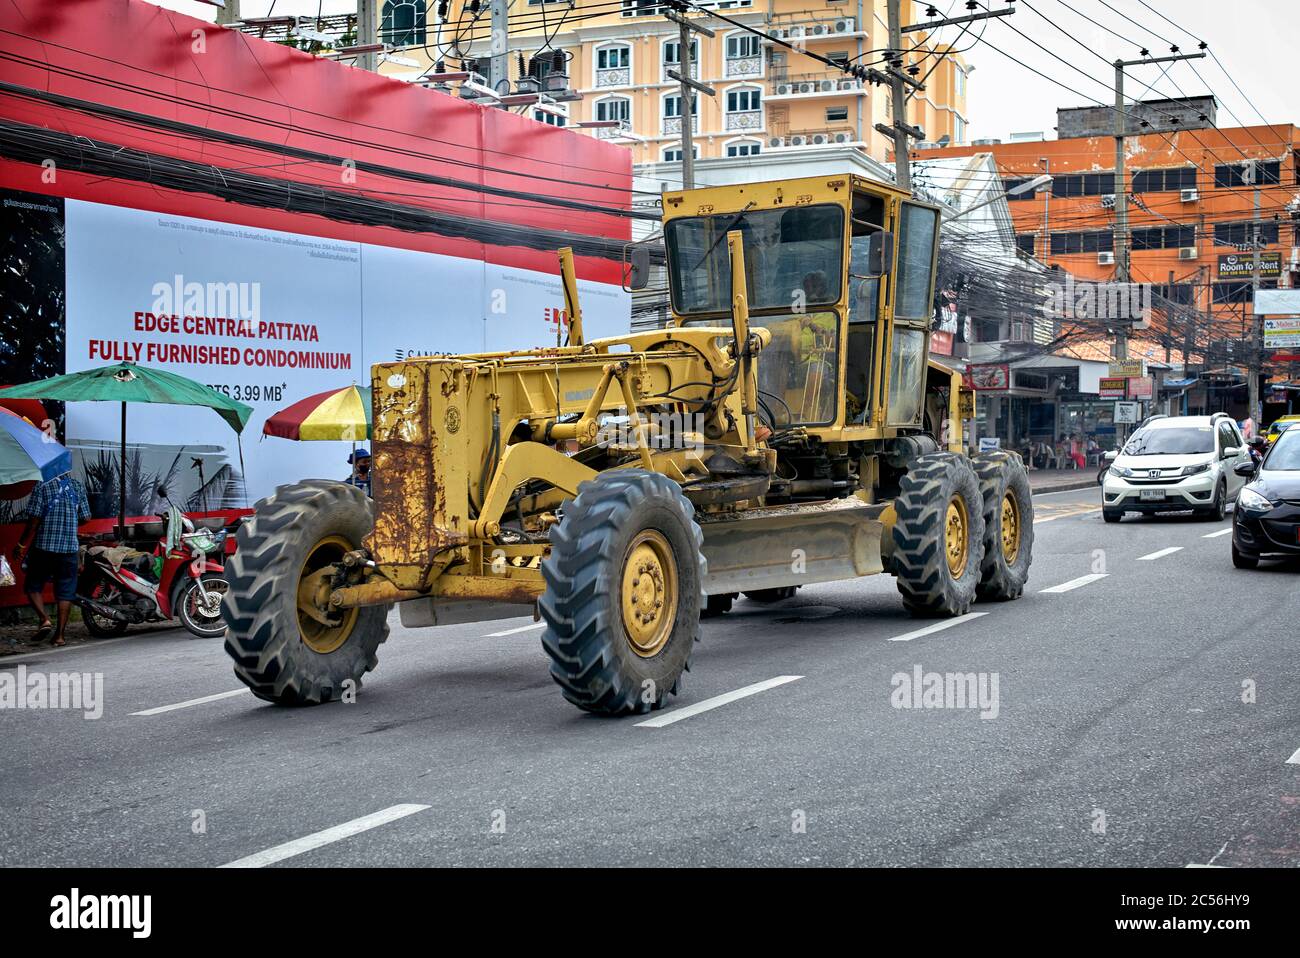 Komatsu grader. Motor graders are designed for preparing the substrate of roads and other flat earth as well as leveling aggregate. Stock Photo